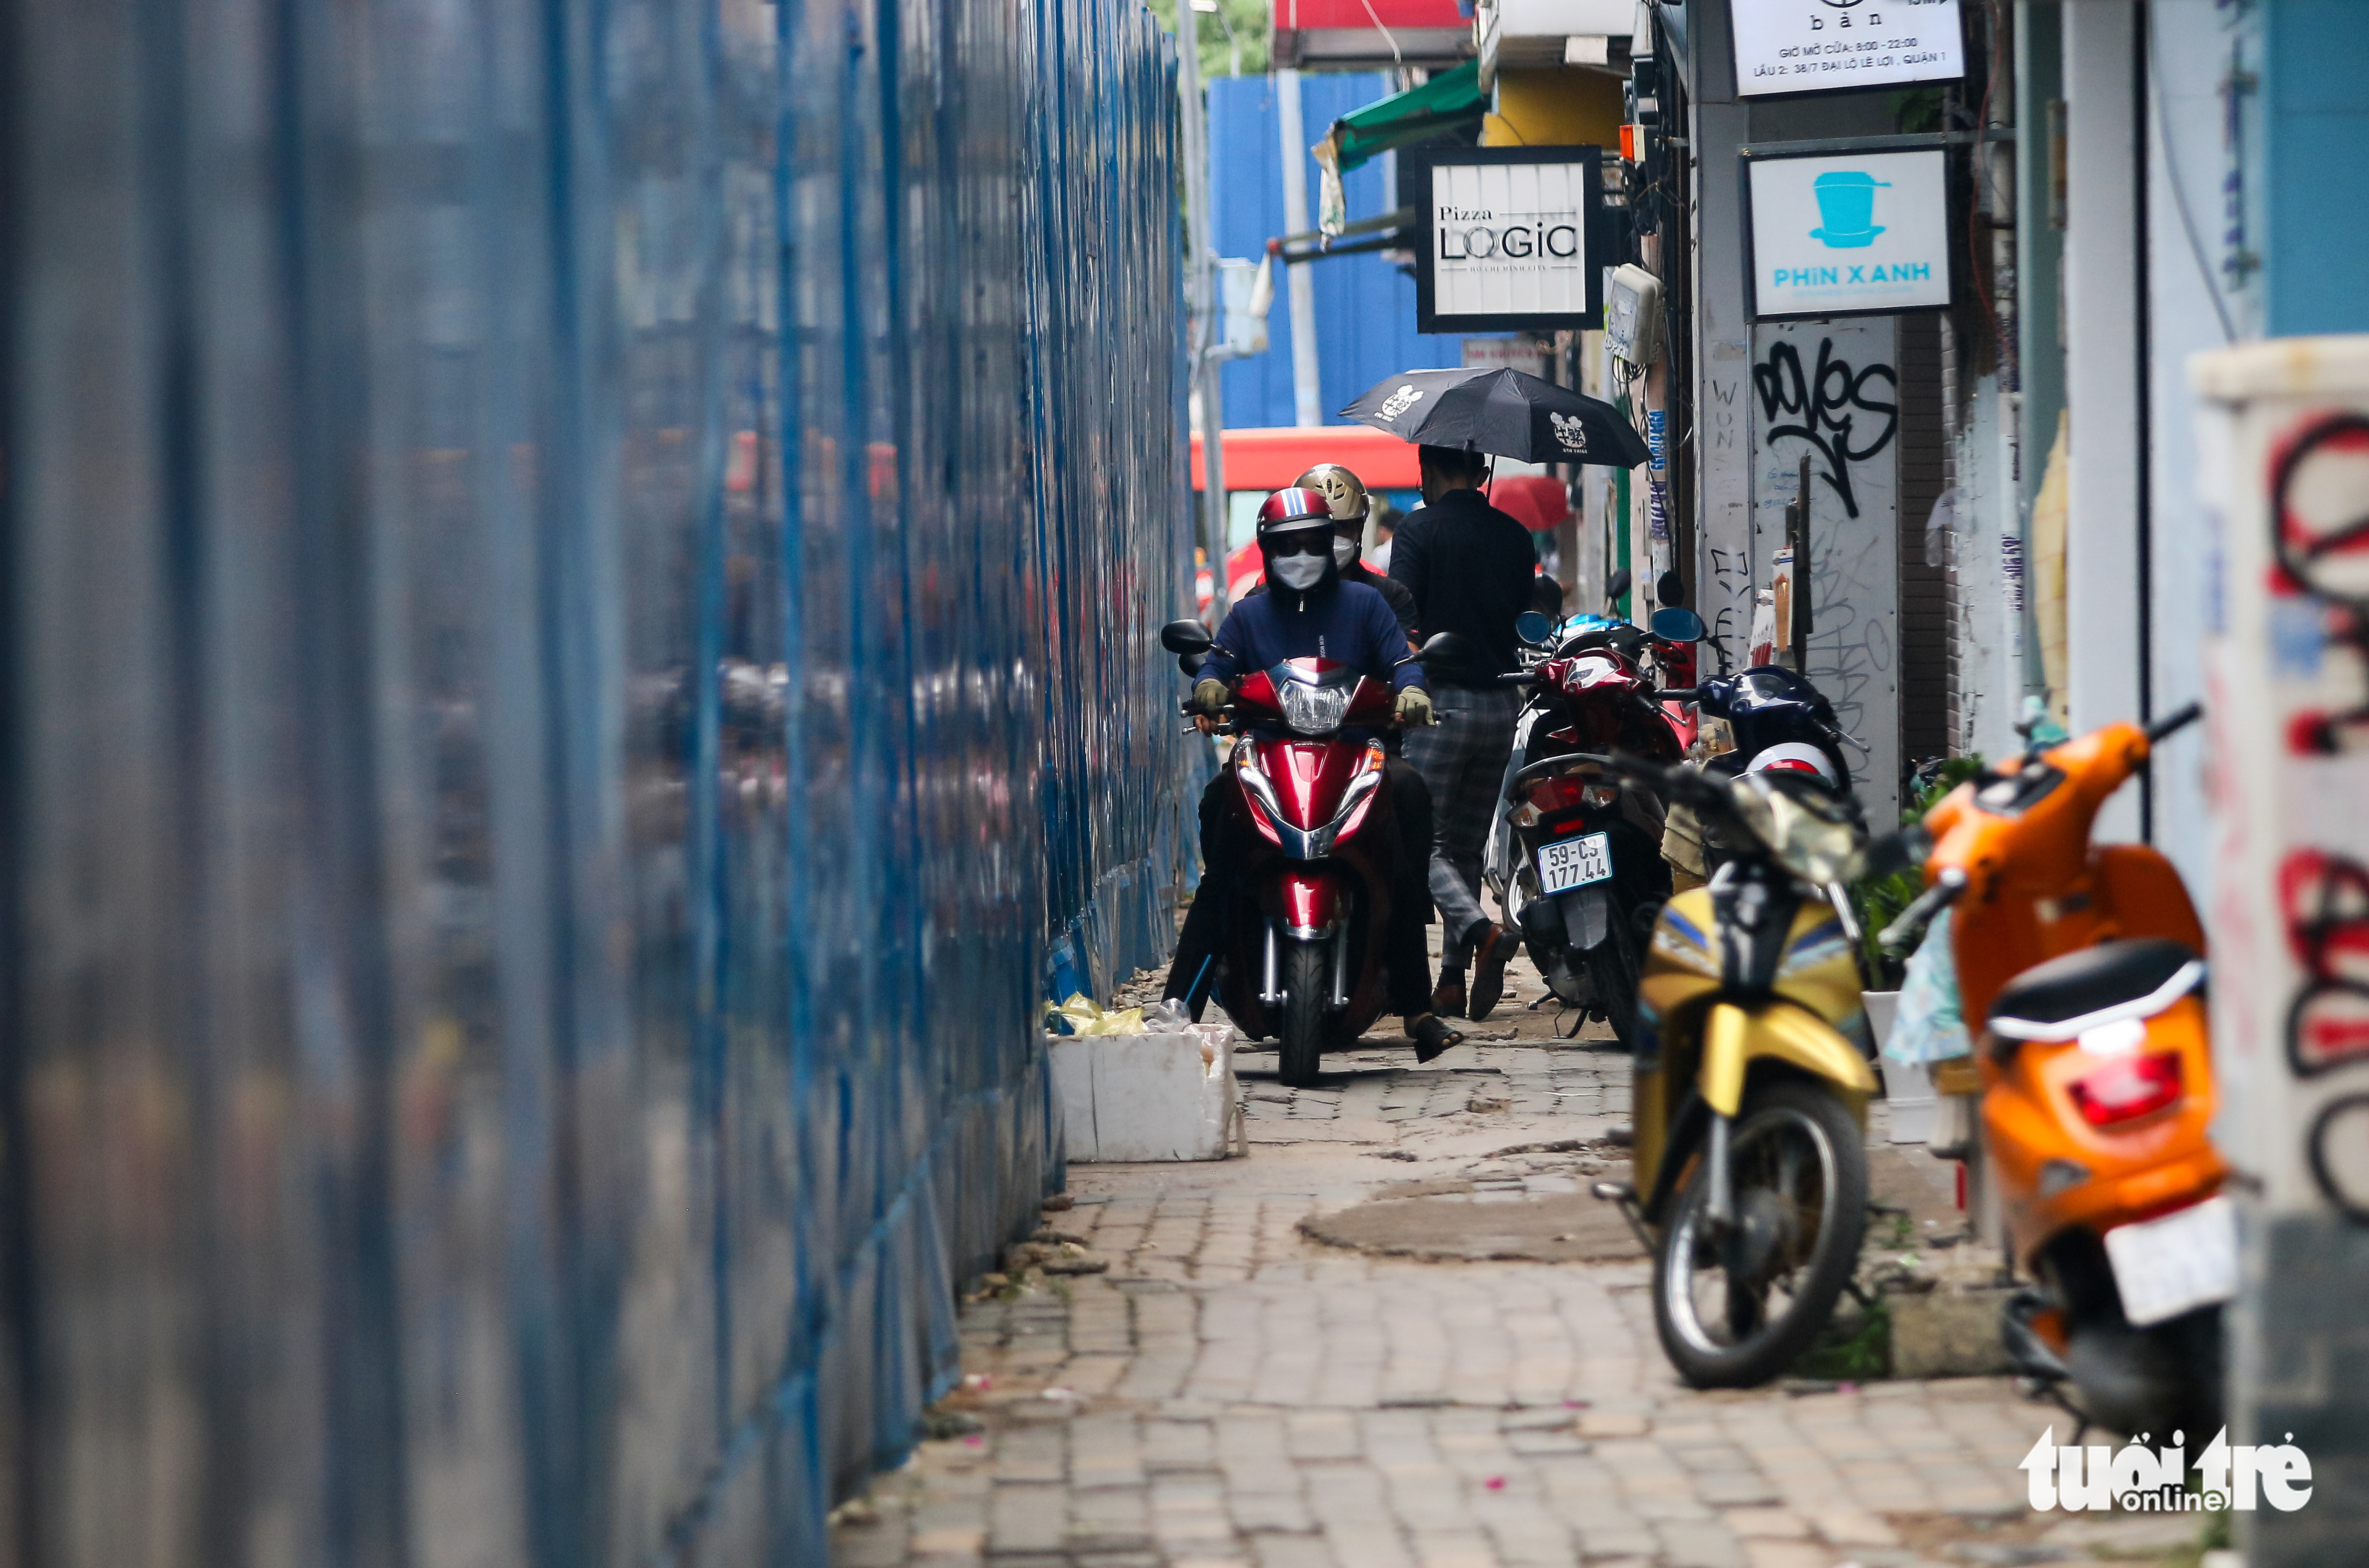 Residents travel on the sidewalk of Le Loi Street in District 1, Ho Chi Minh City, April 14, 2022. Photo: Quang Dinh / Tuoi Tre